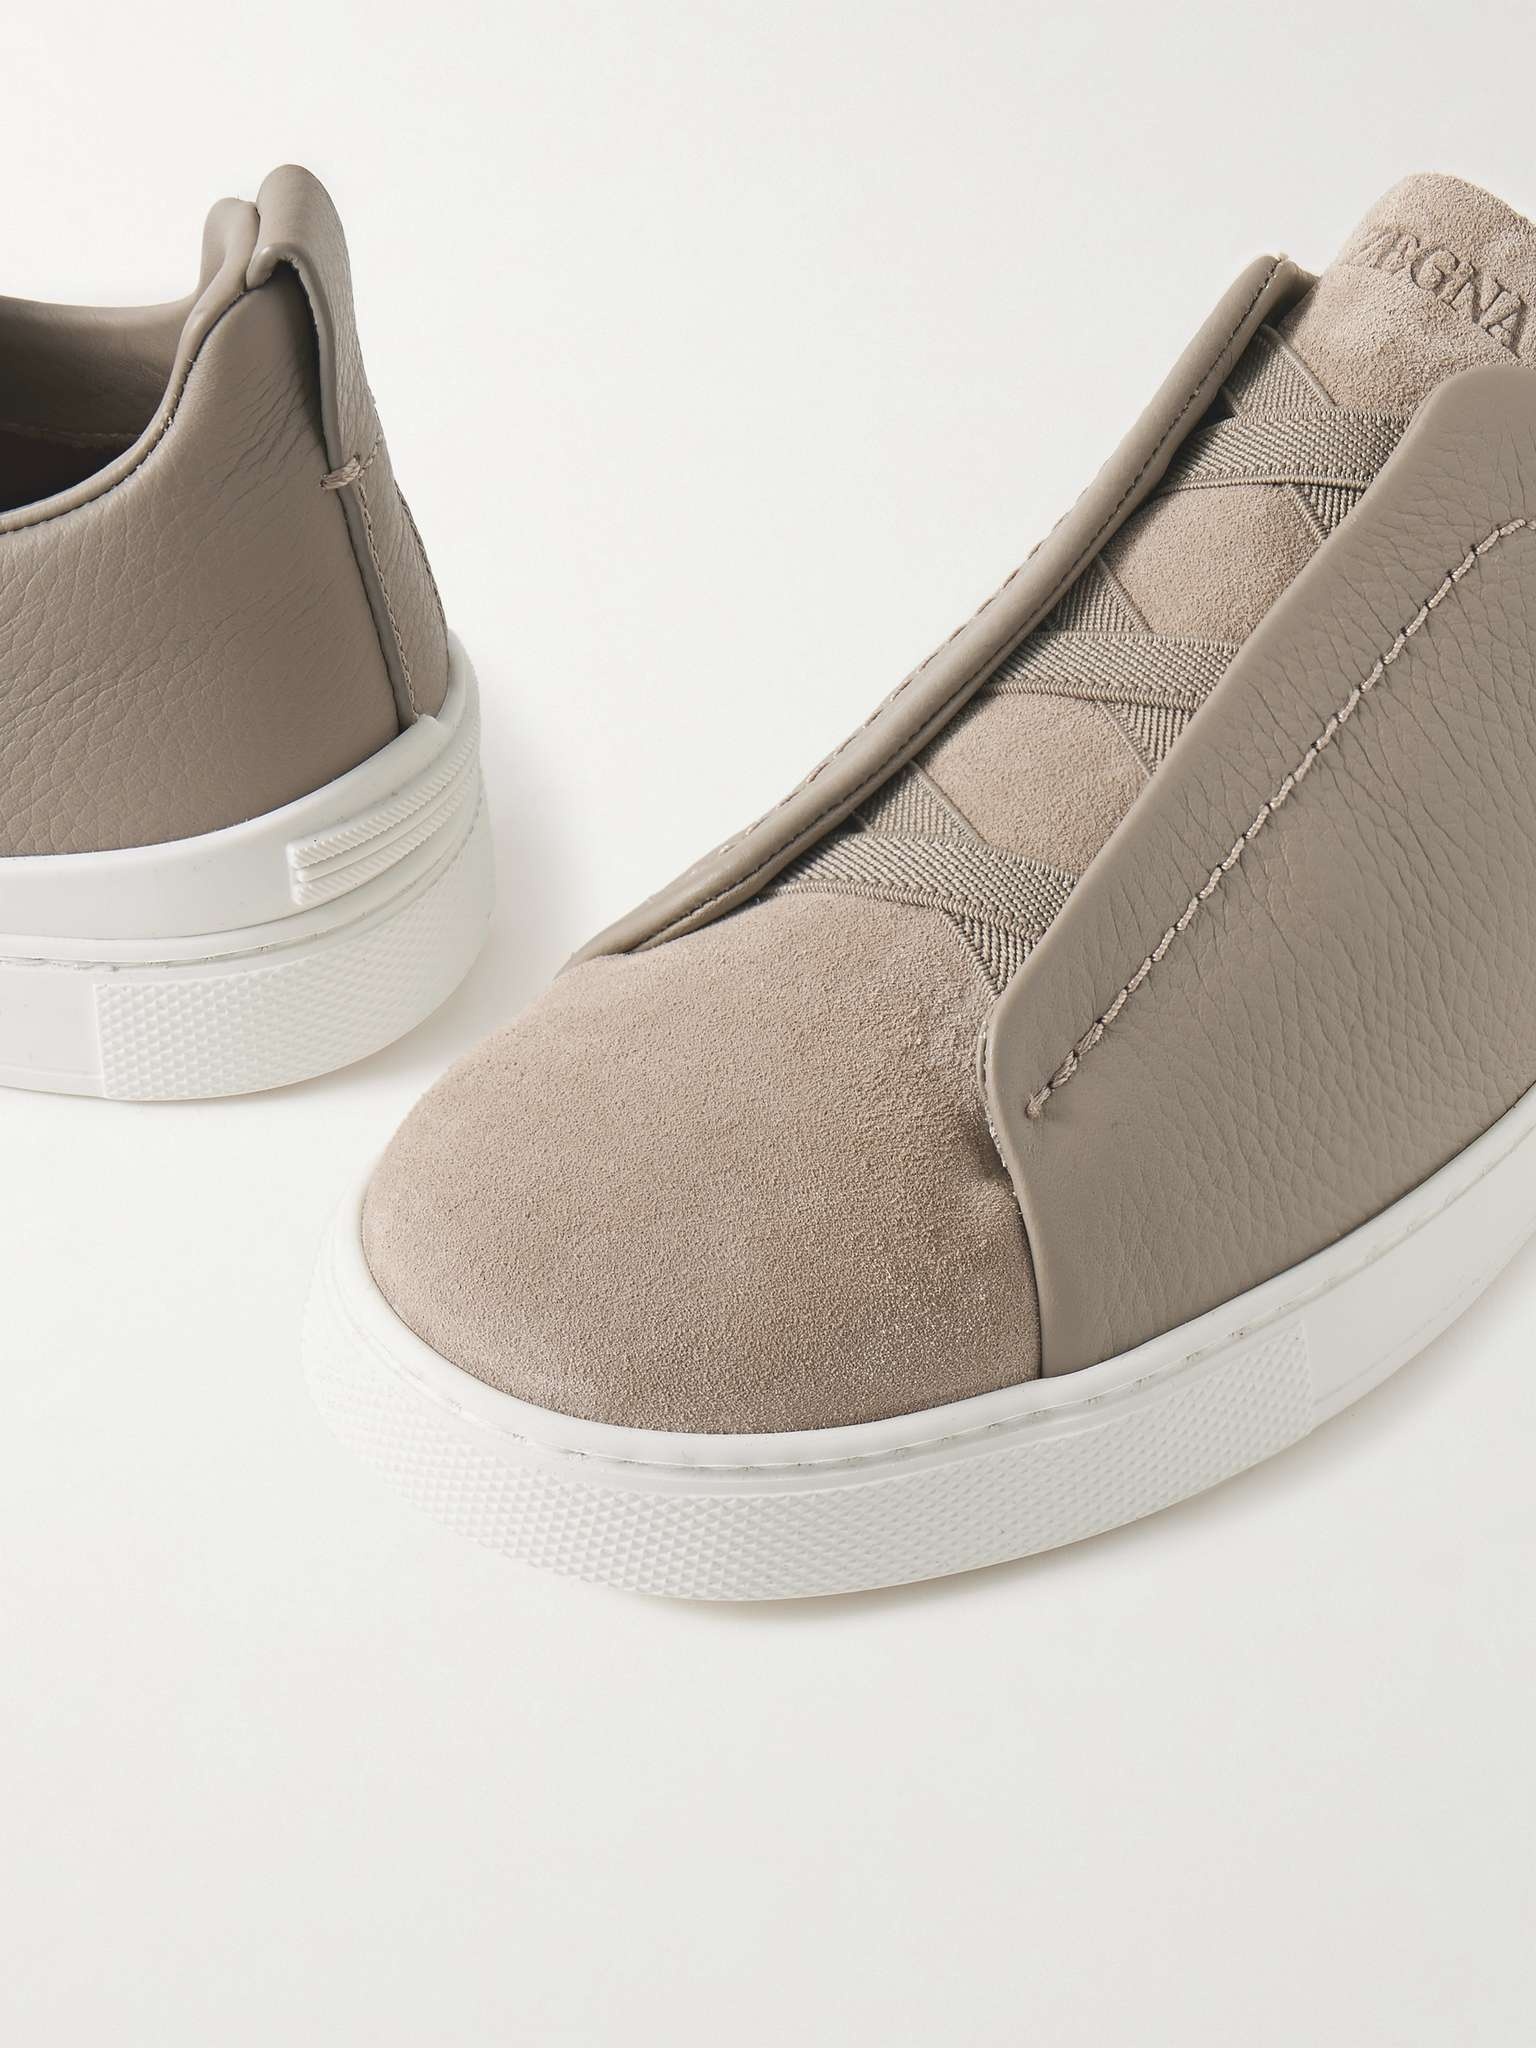 Triple Stitch Full-Grain Leather and Suede Sneakers - 6